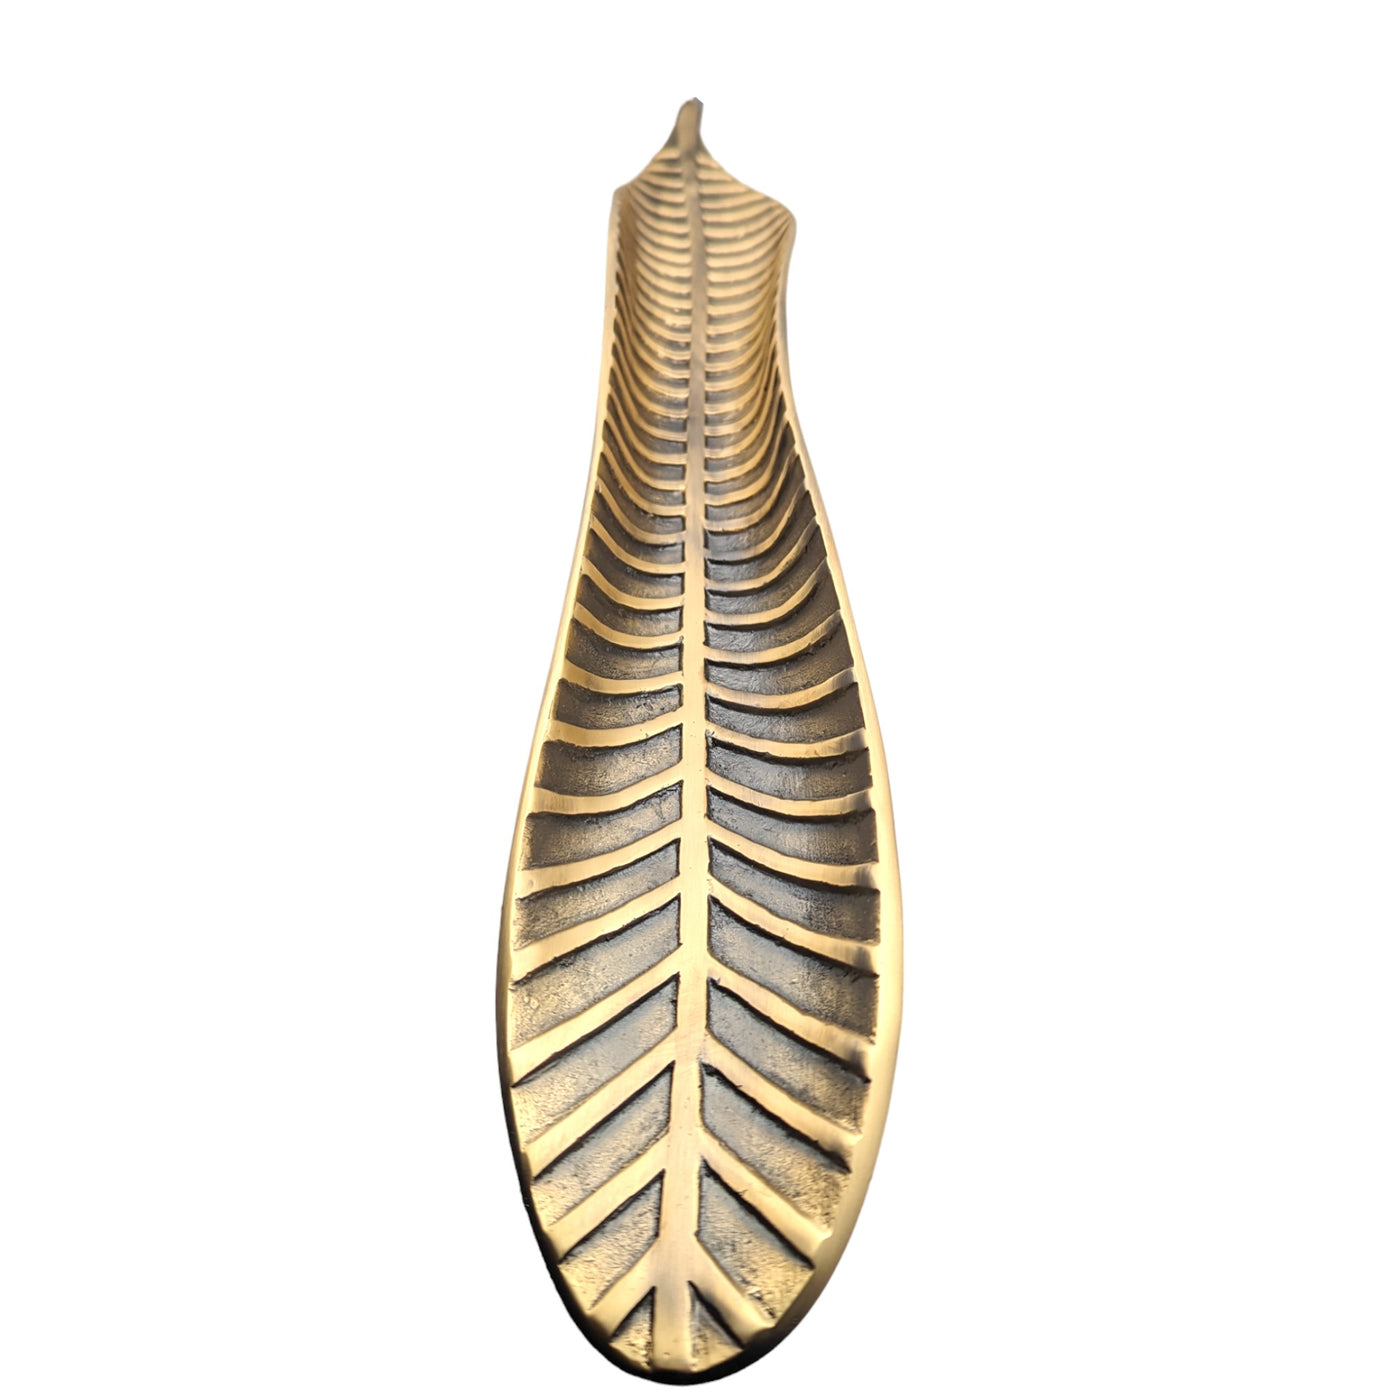 24 1/2 inch (12 inch c-c) Artistic Frond Oversize Pull (Several Finishes Available)